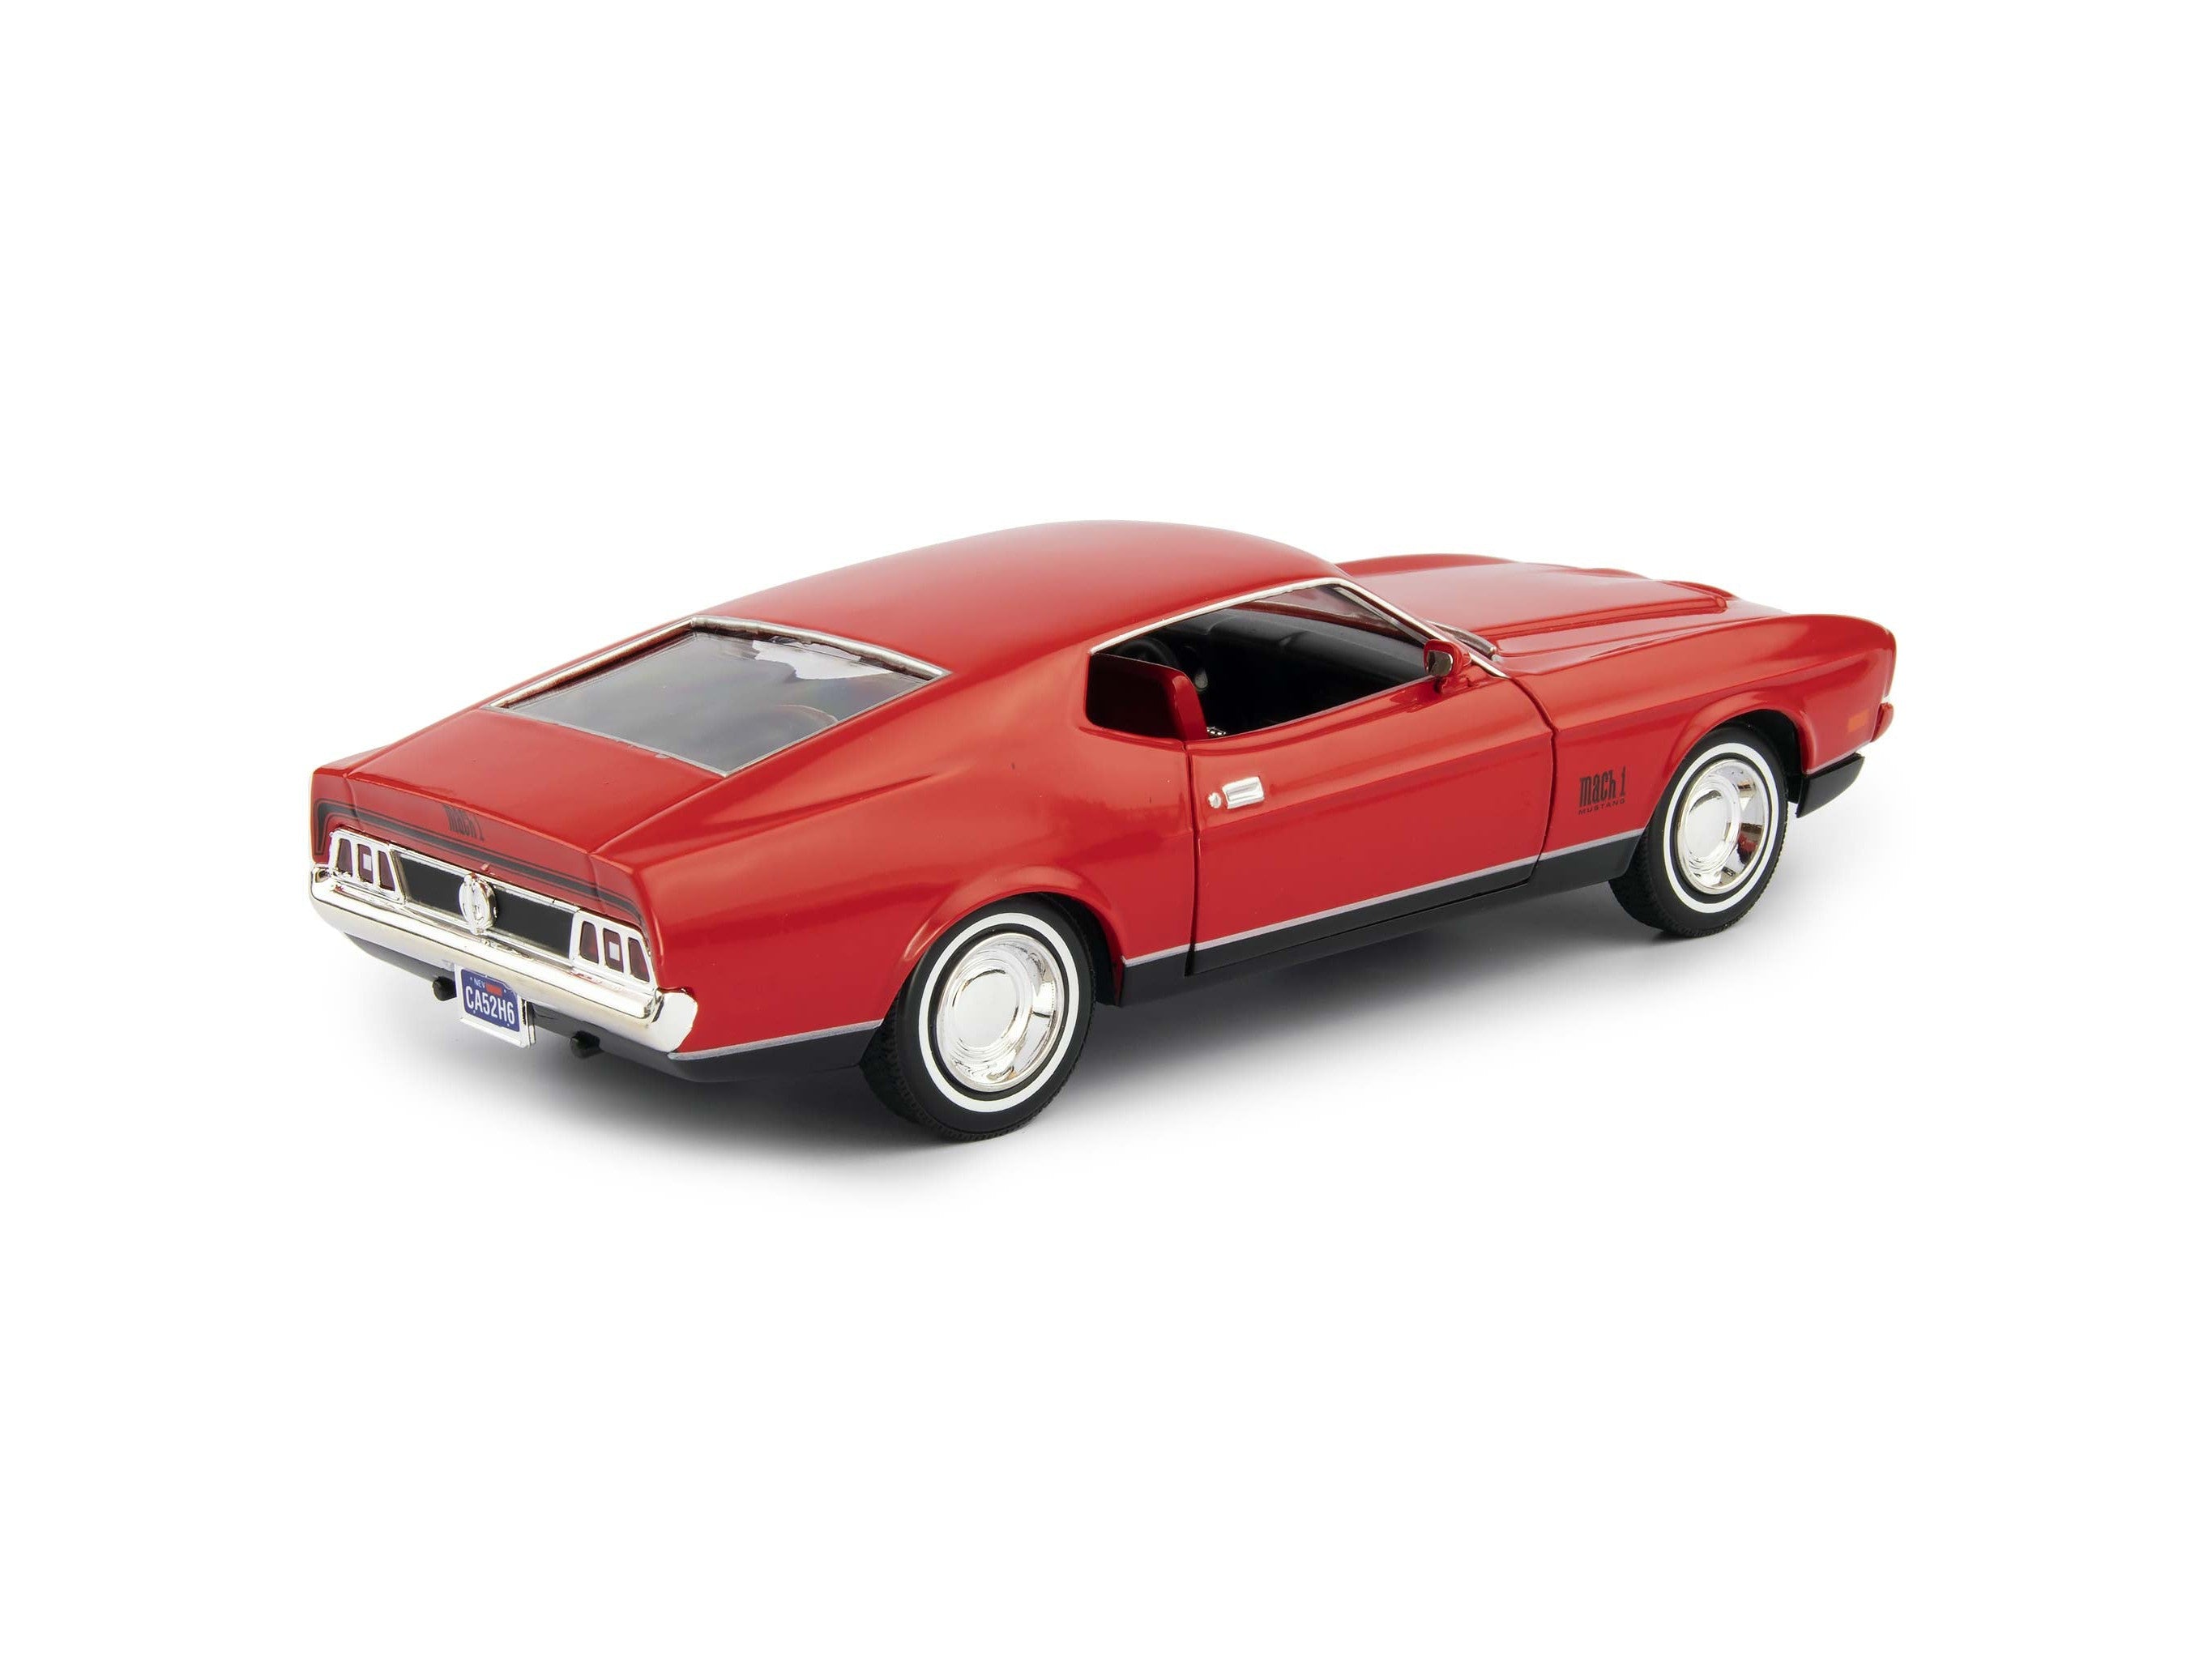 Ford Mustang Mach 1 Bond Diamonds Are Forever - 1:24 Scale